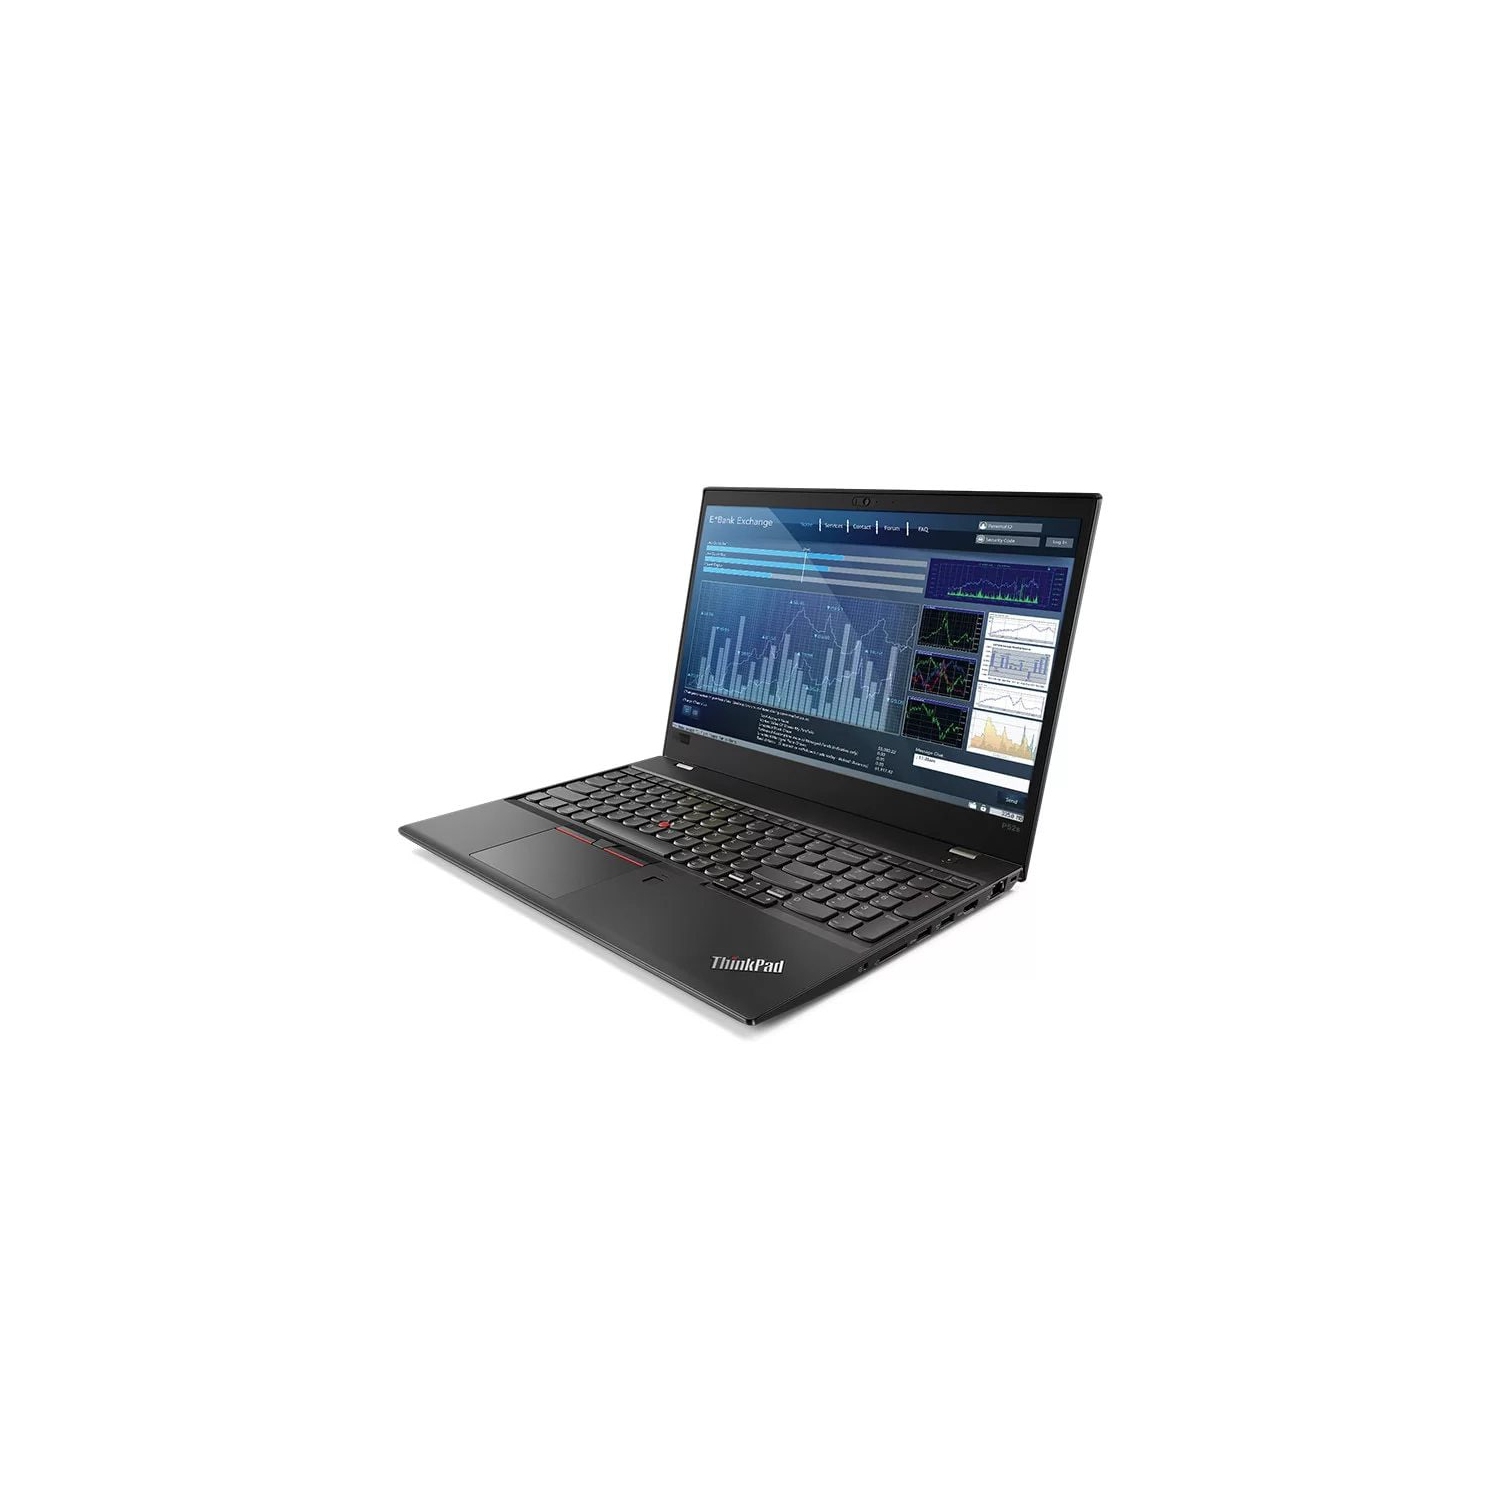 Refurbished (Excellent) Lenovo Thinkpad P52 15.6inch 4k 3840x2160 touch/intel XEON E2176M up to 4.40GHz 6 cores/Nvidia Quadro P2000/64GB RAM/1TB SSD/Windows 11 pro/1 year warranty